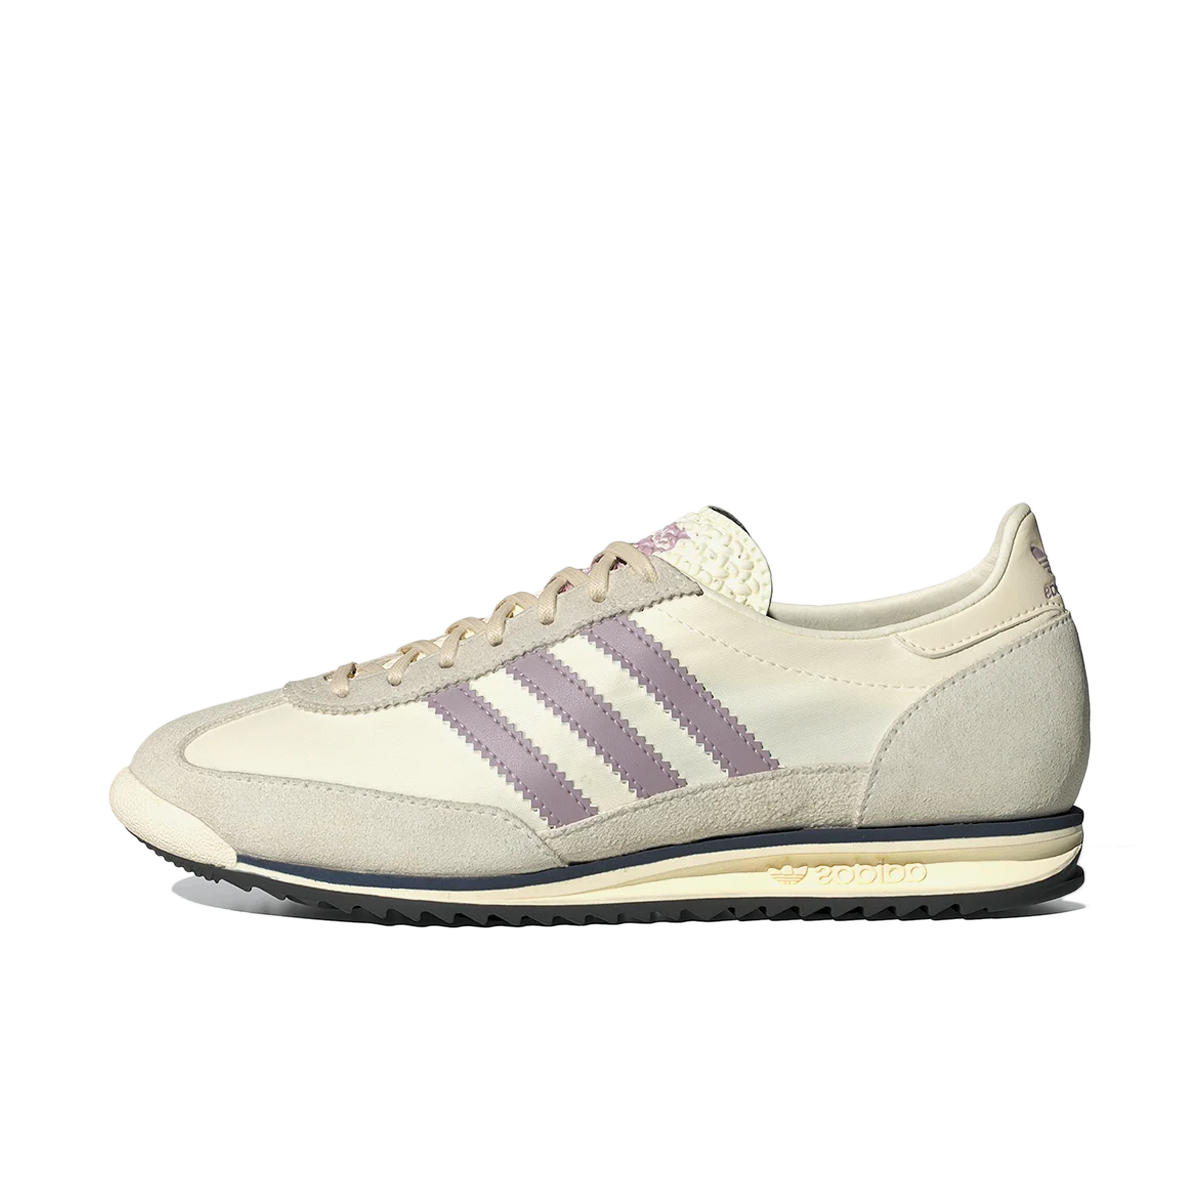 adidas SL 72 'Almost Pink' IE3428